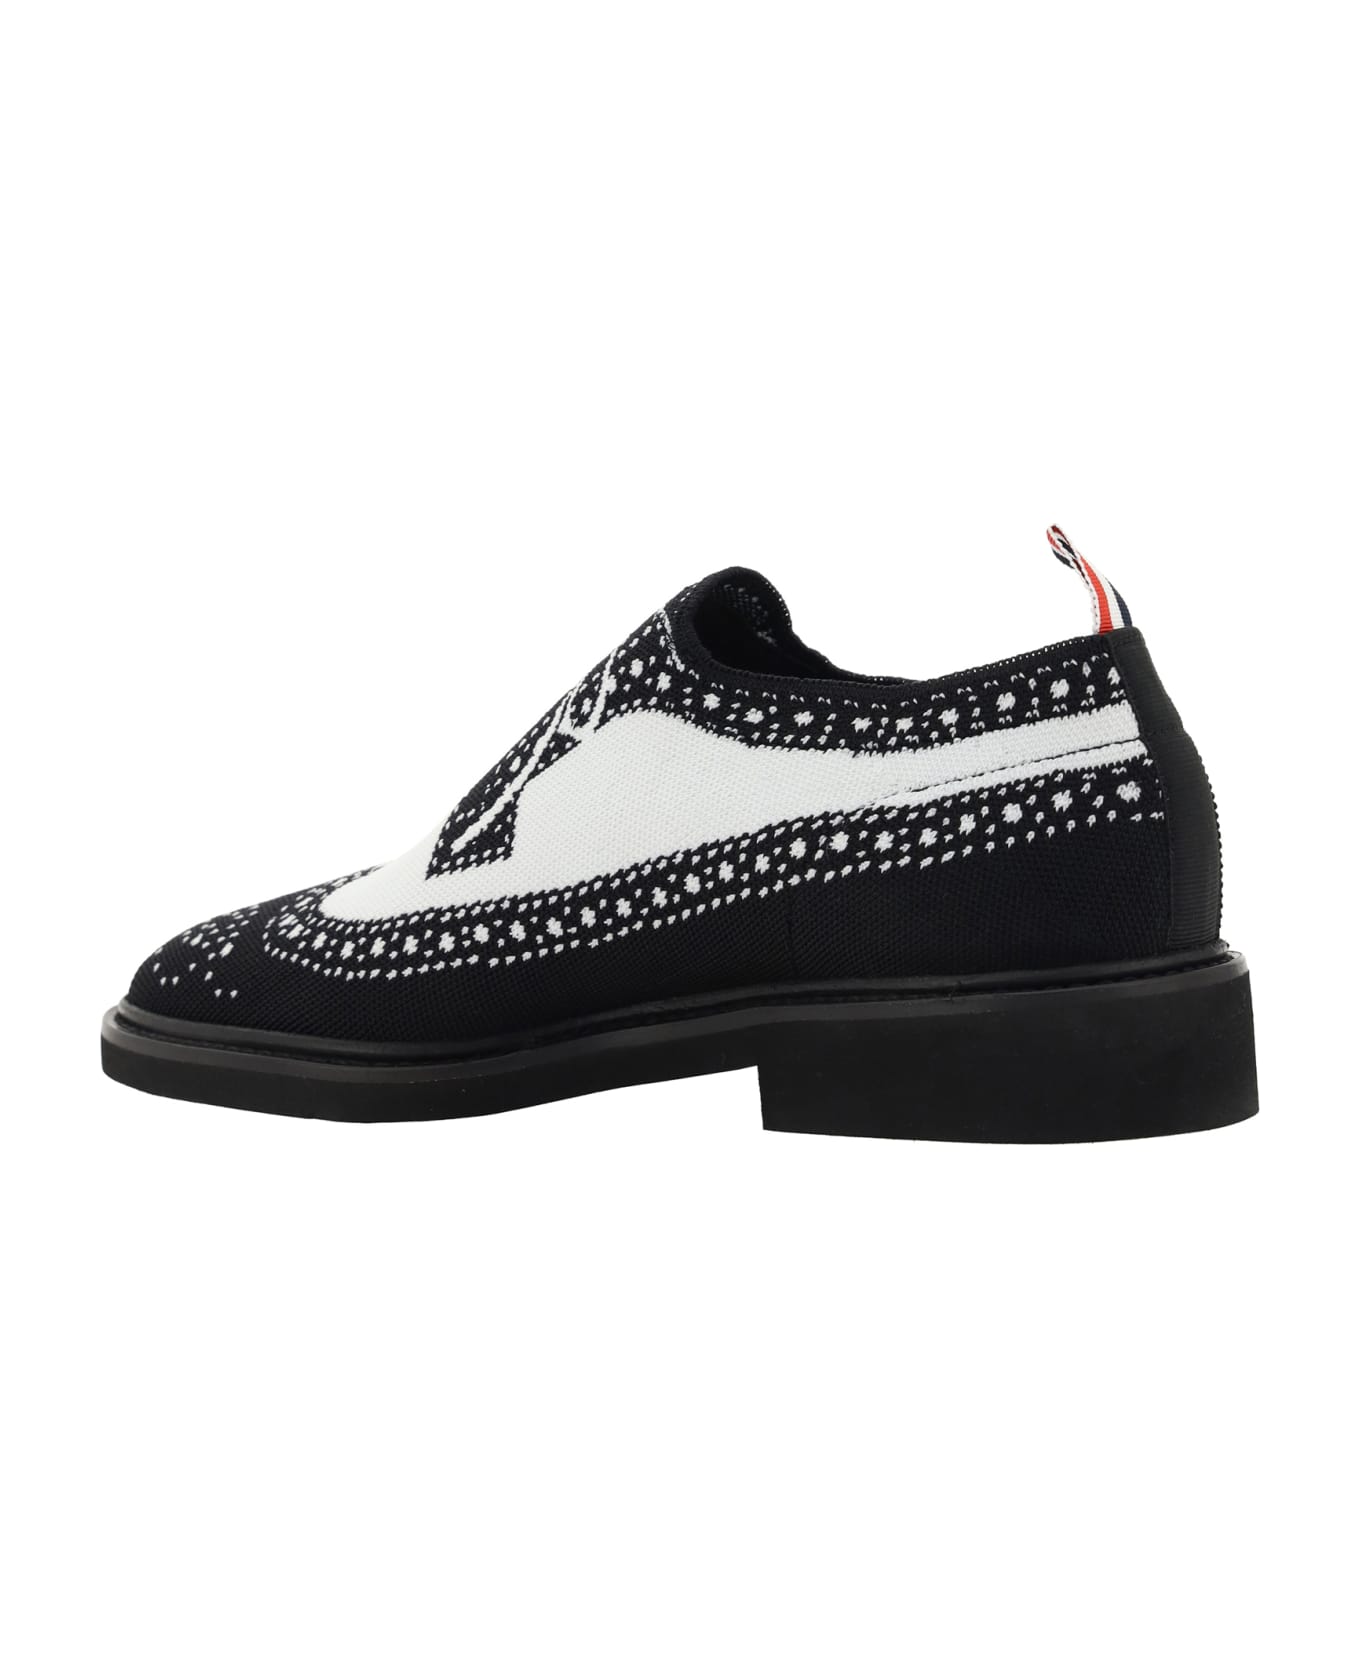 Thom Browne Lace-up Shoes - BLACK